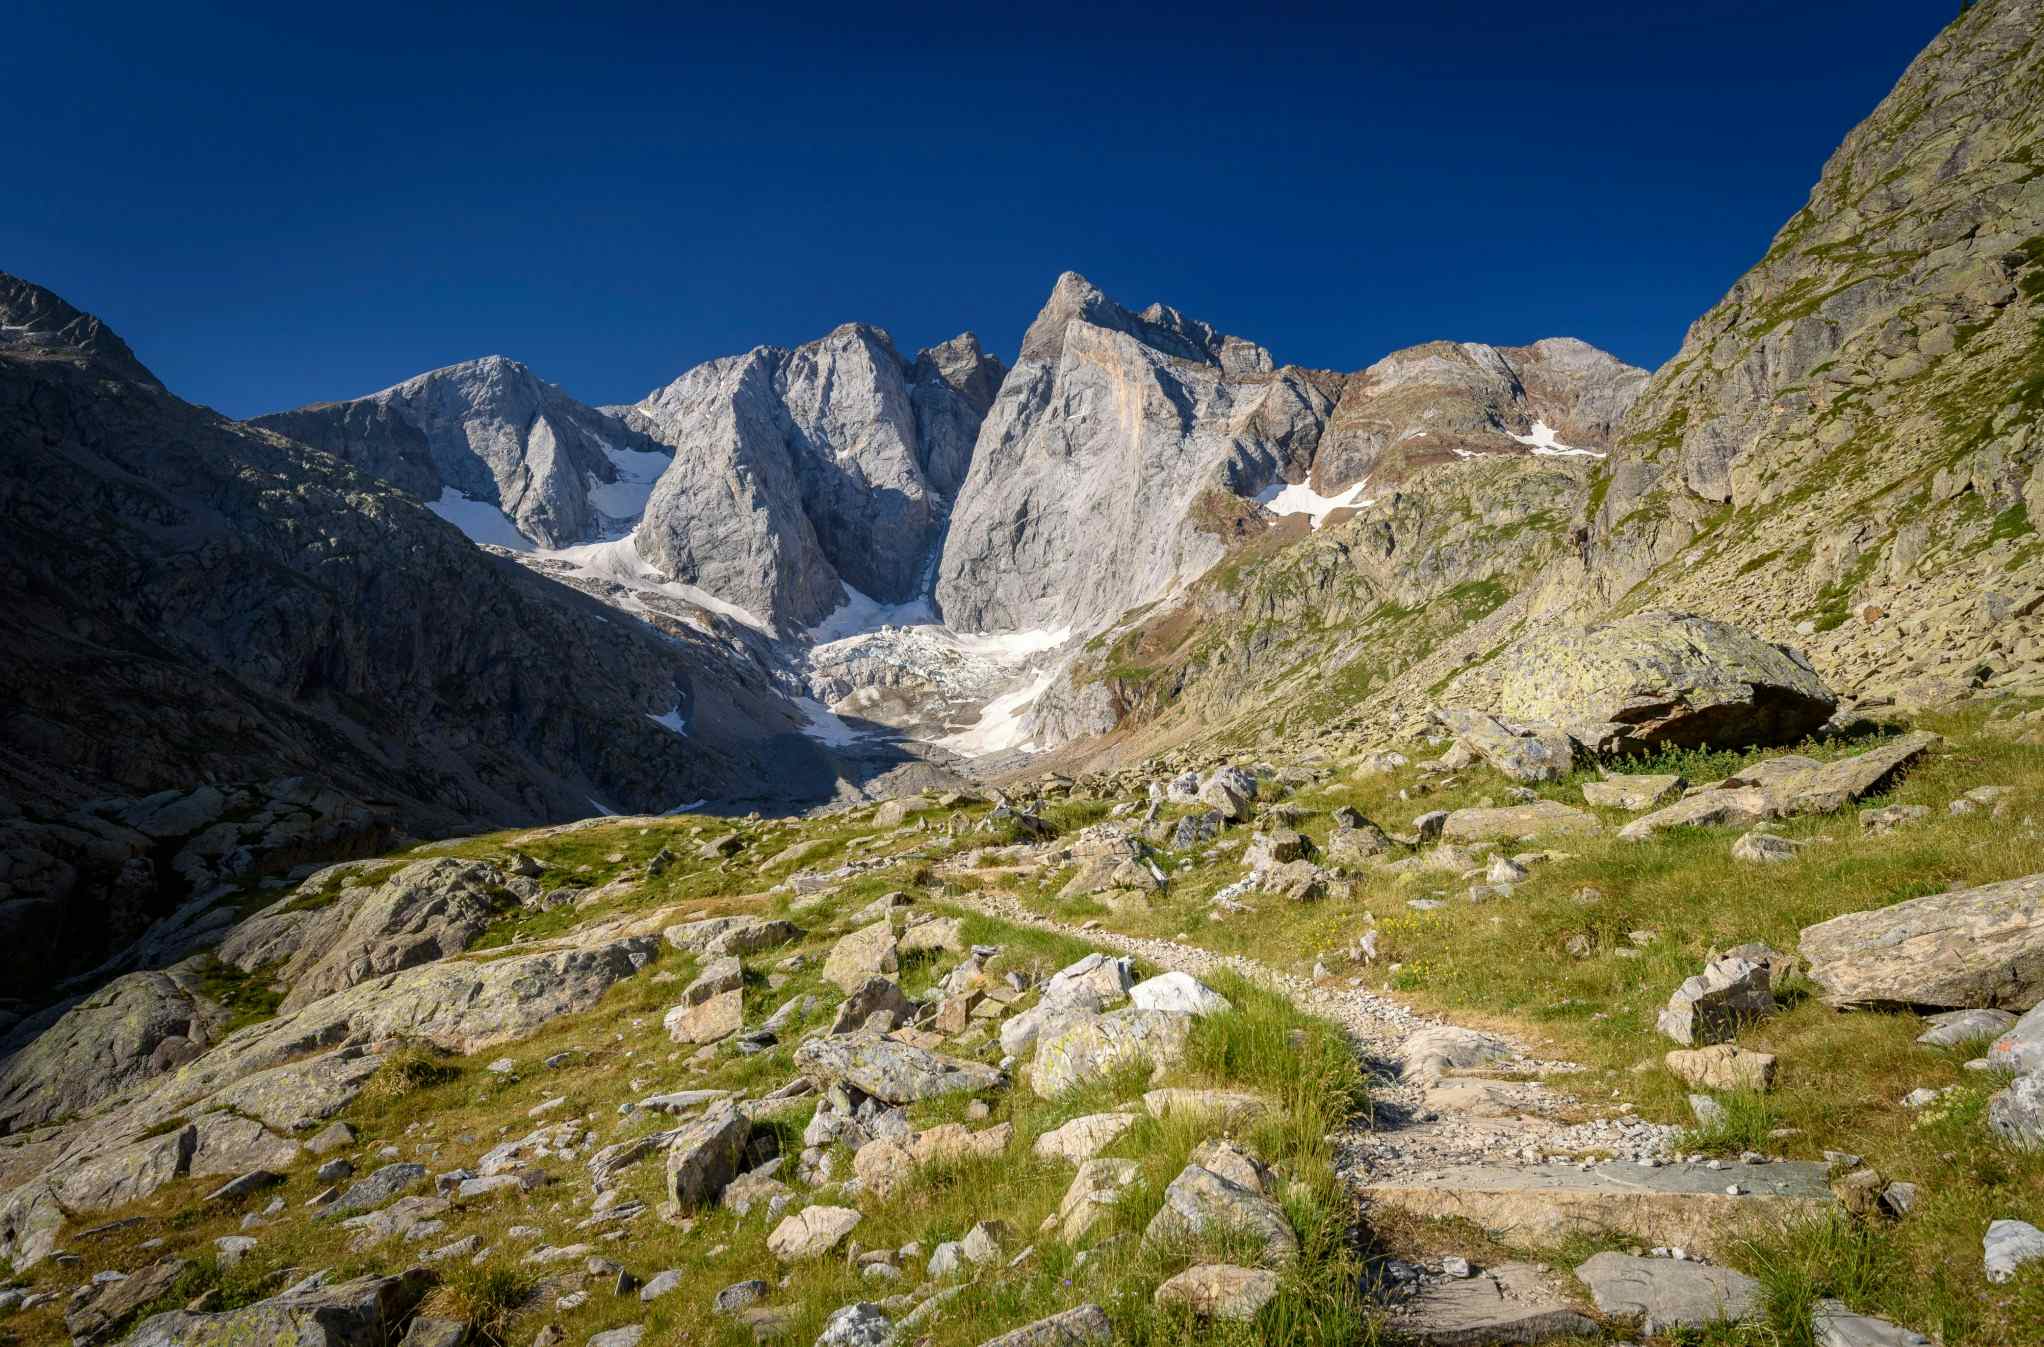 Vignemale in the French Pyrenees. Photo: Canva - https://www.canva.com/design/DAFrcxvOwow/yETI8LfBMjNoouUA4sx-Ng/edit